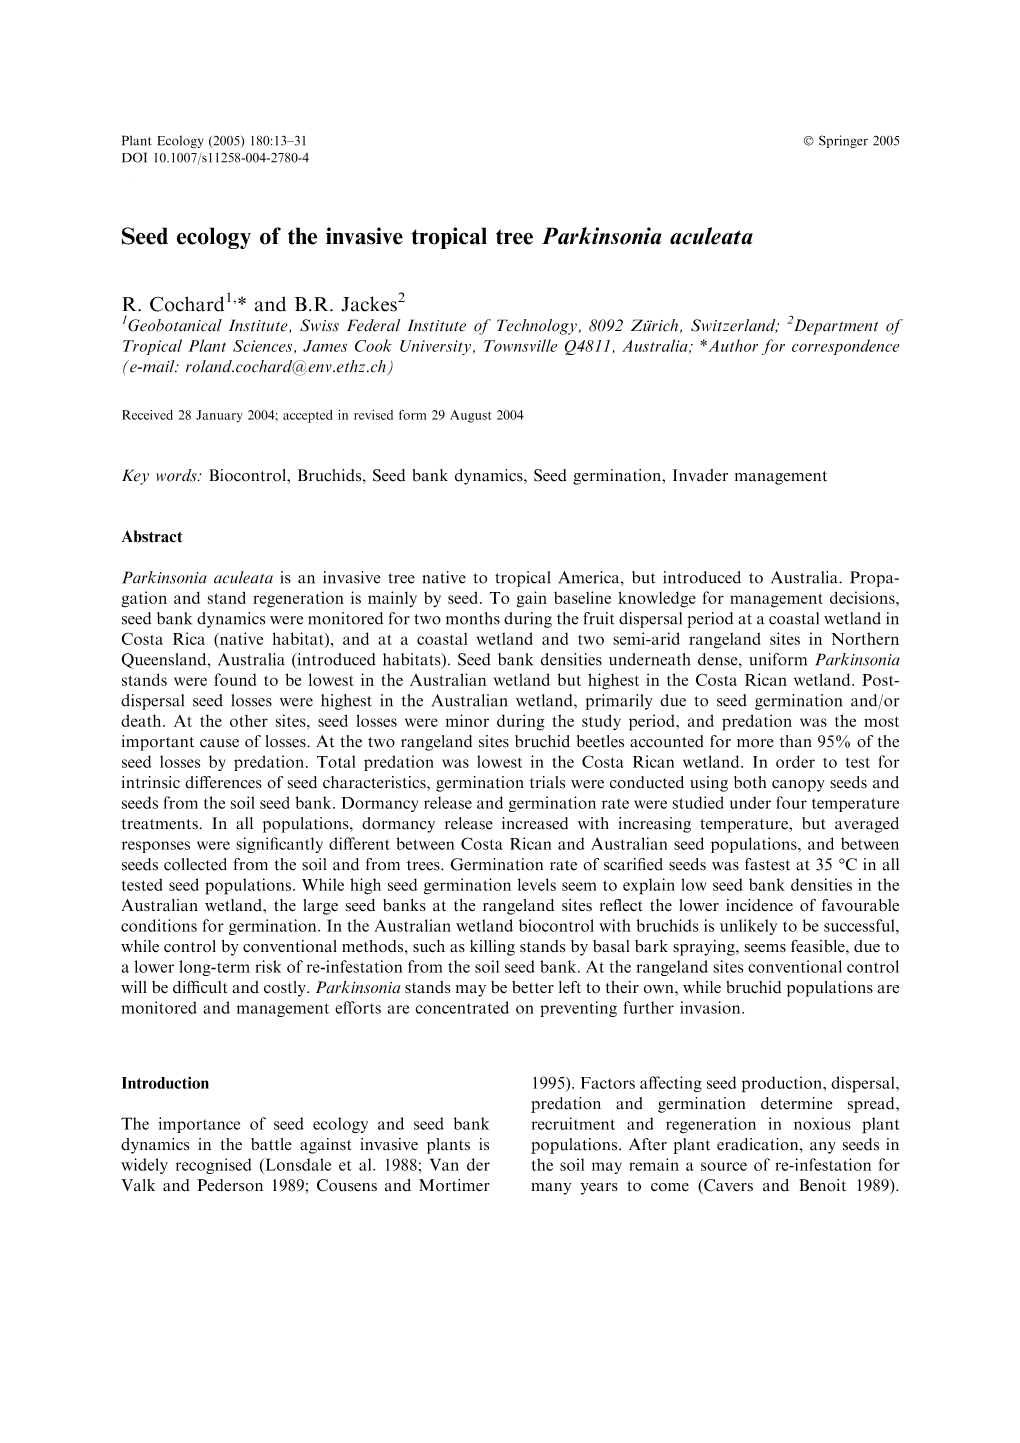 Seed Ecology of the Invasive Tropical Tree Parkinsonia Aculeata